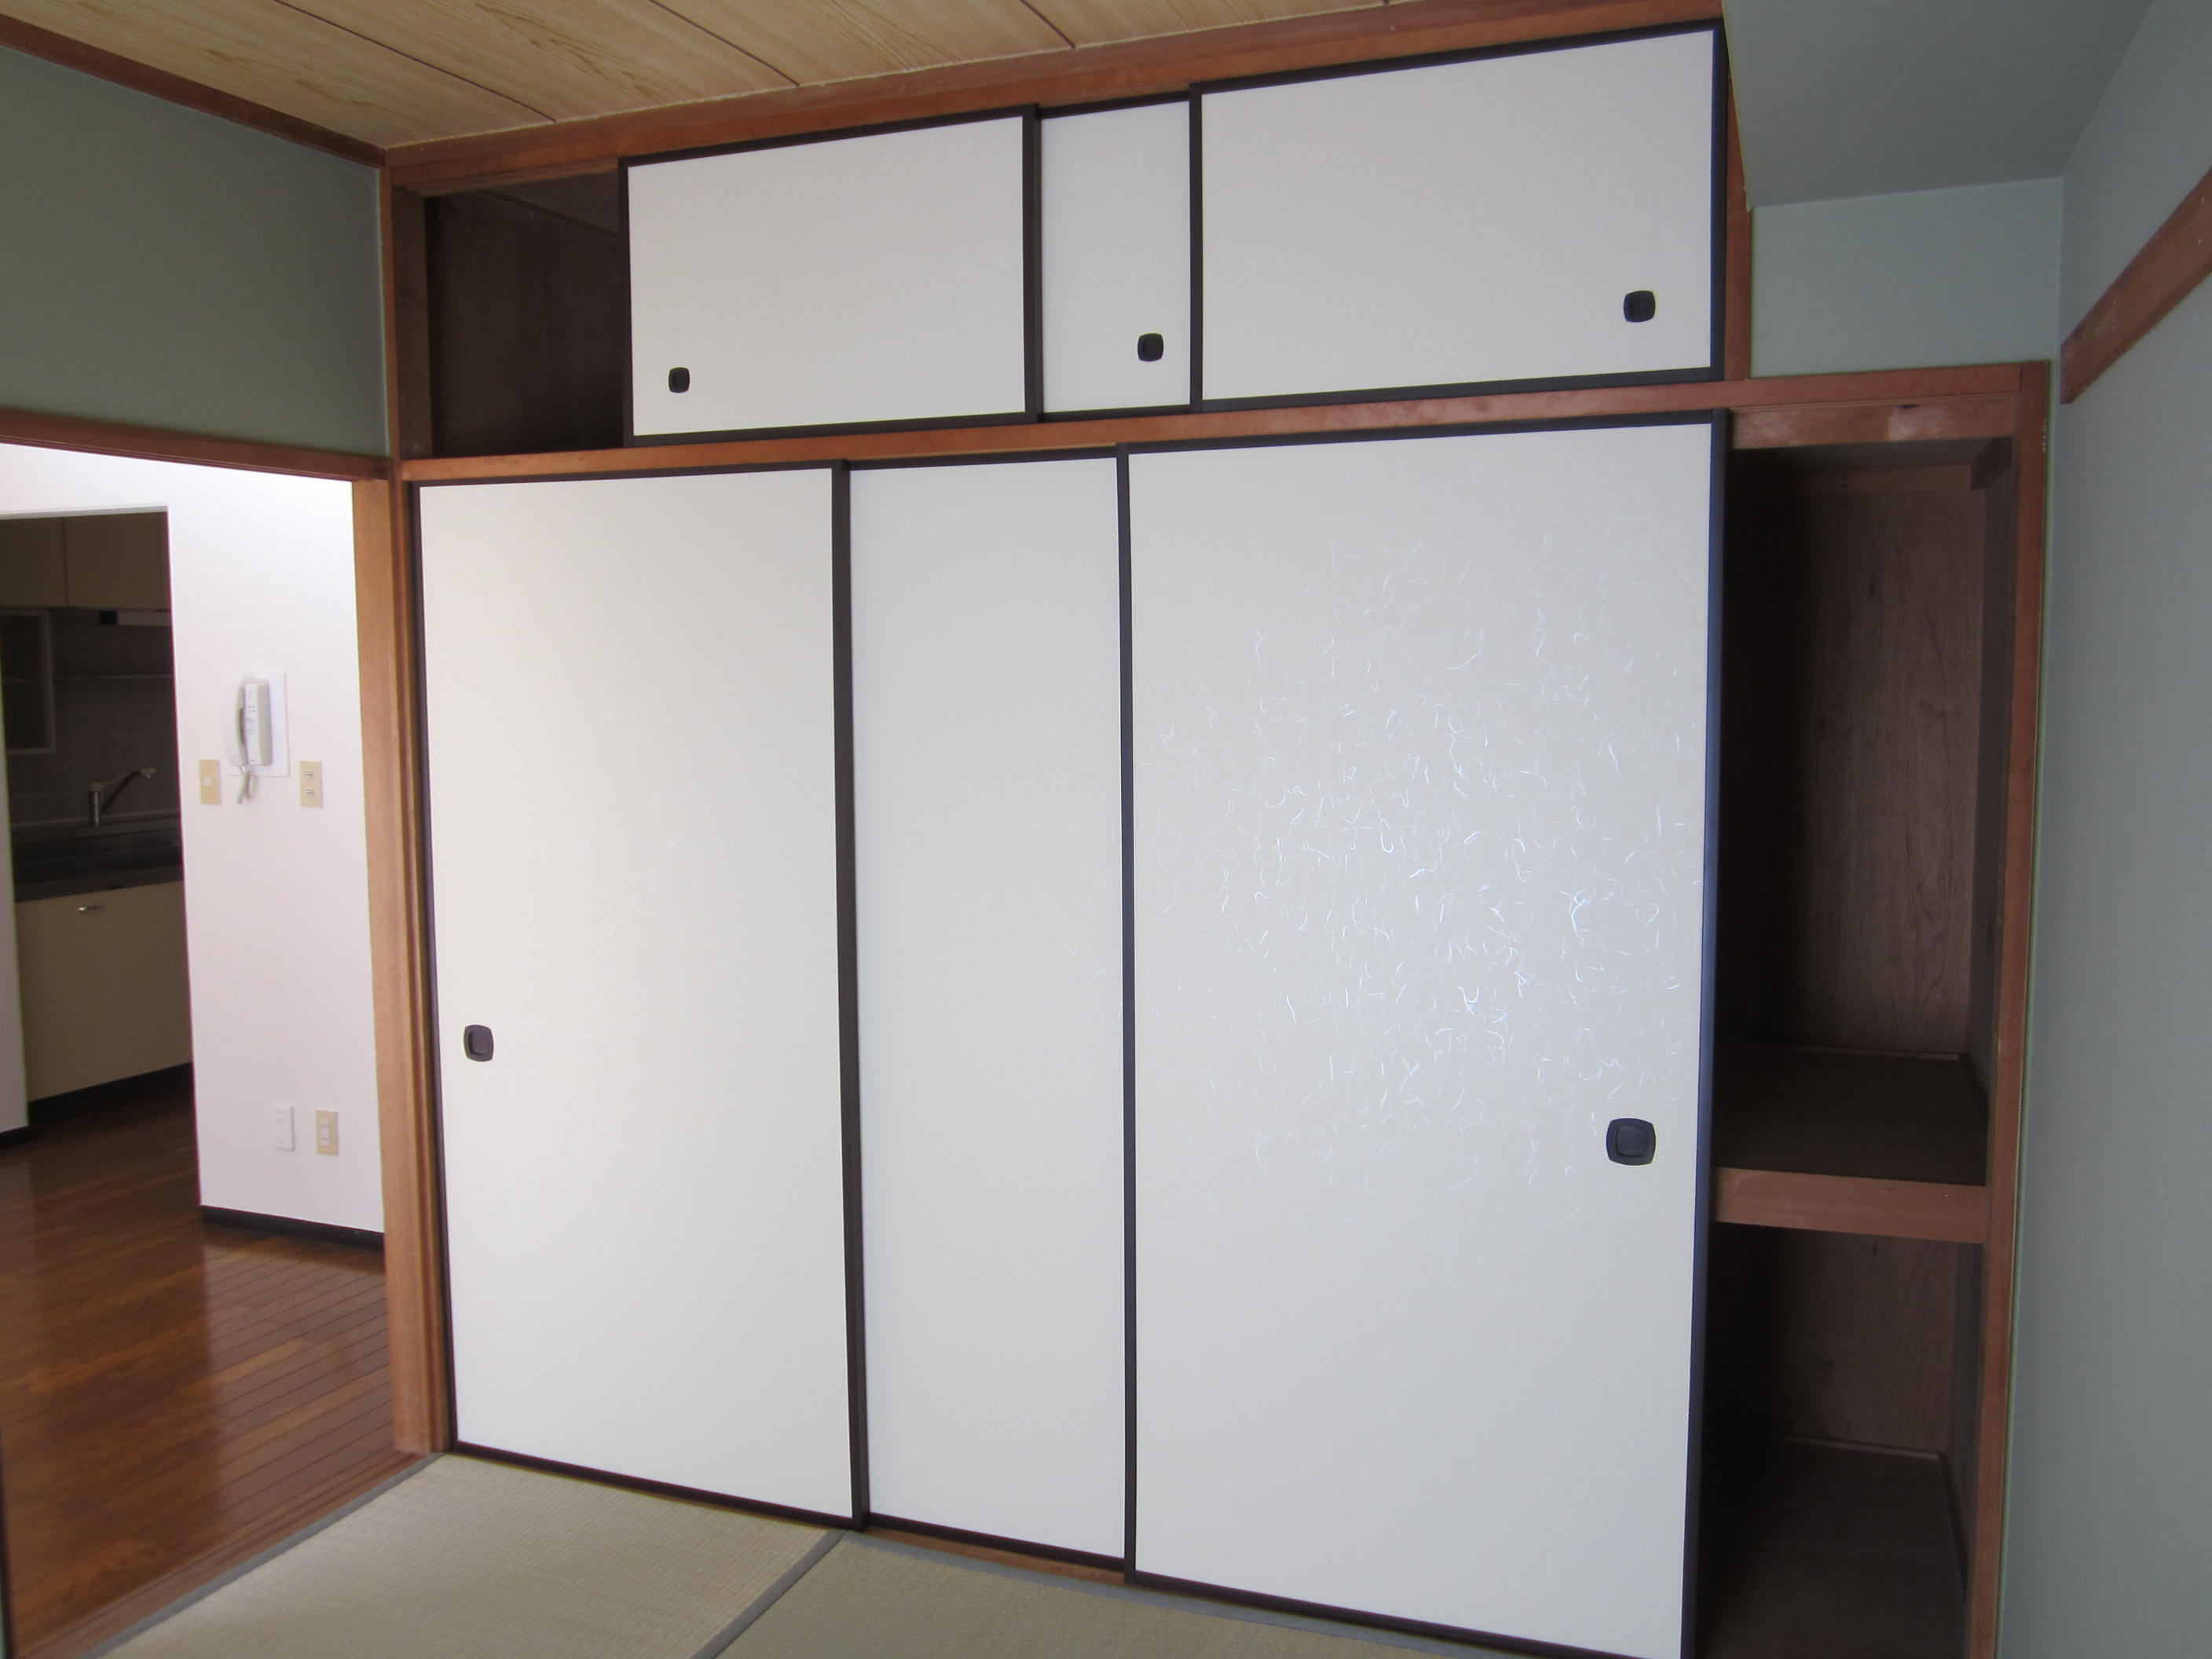 Other room space. There is also a upper closet, Also useful for storage